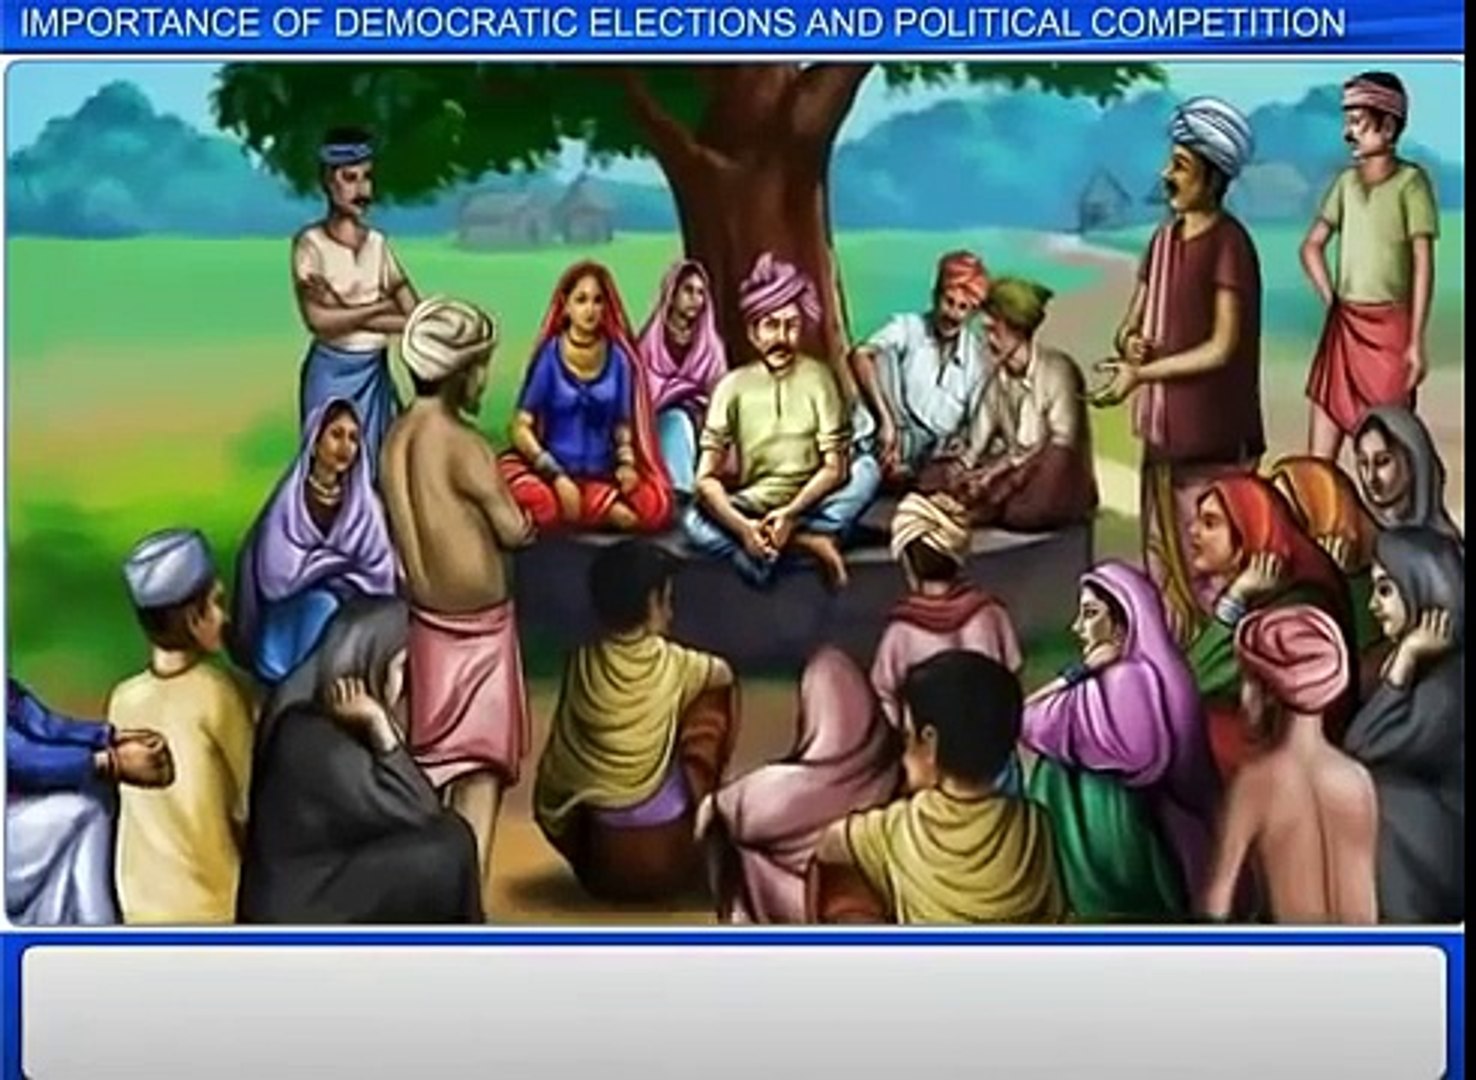 Cbse School Video Tutorial Class 9 Civics Electoral politics importance of  democratic elections and - video Dailymotion